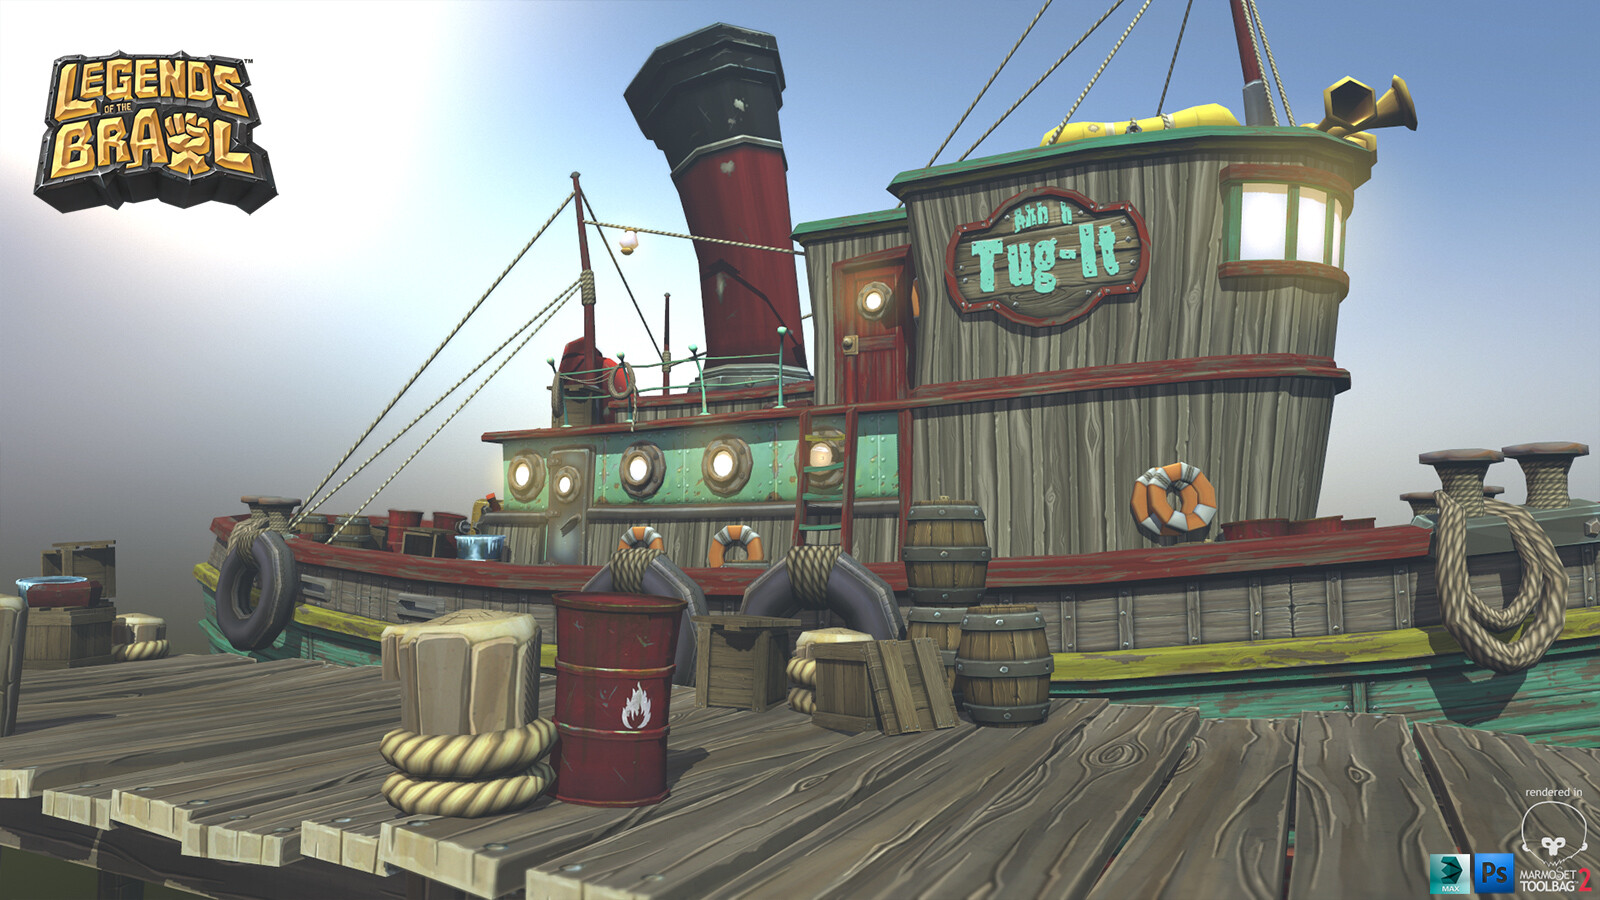 Stylized Tugboat, Props and Docks created for Legends of the Brawl